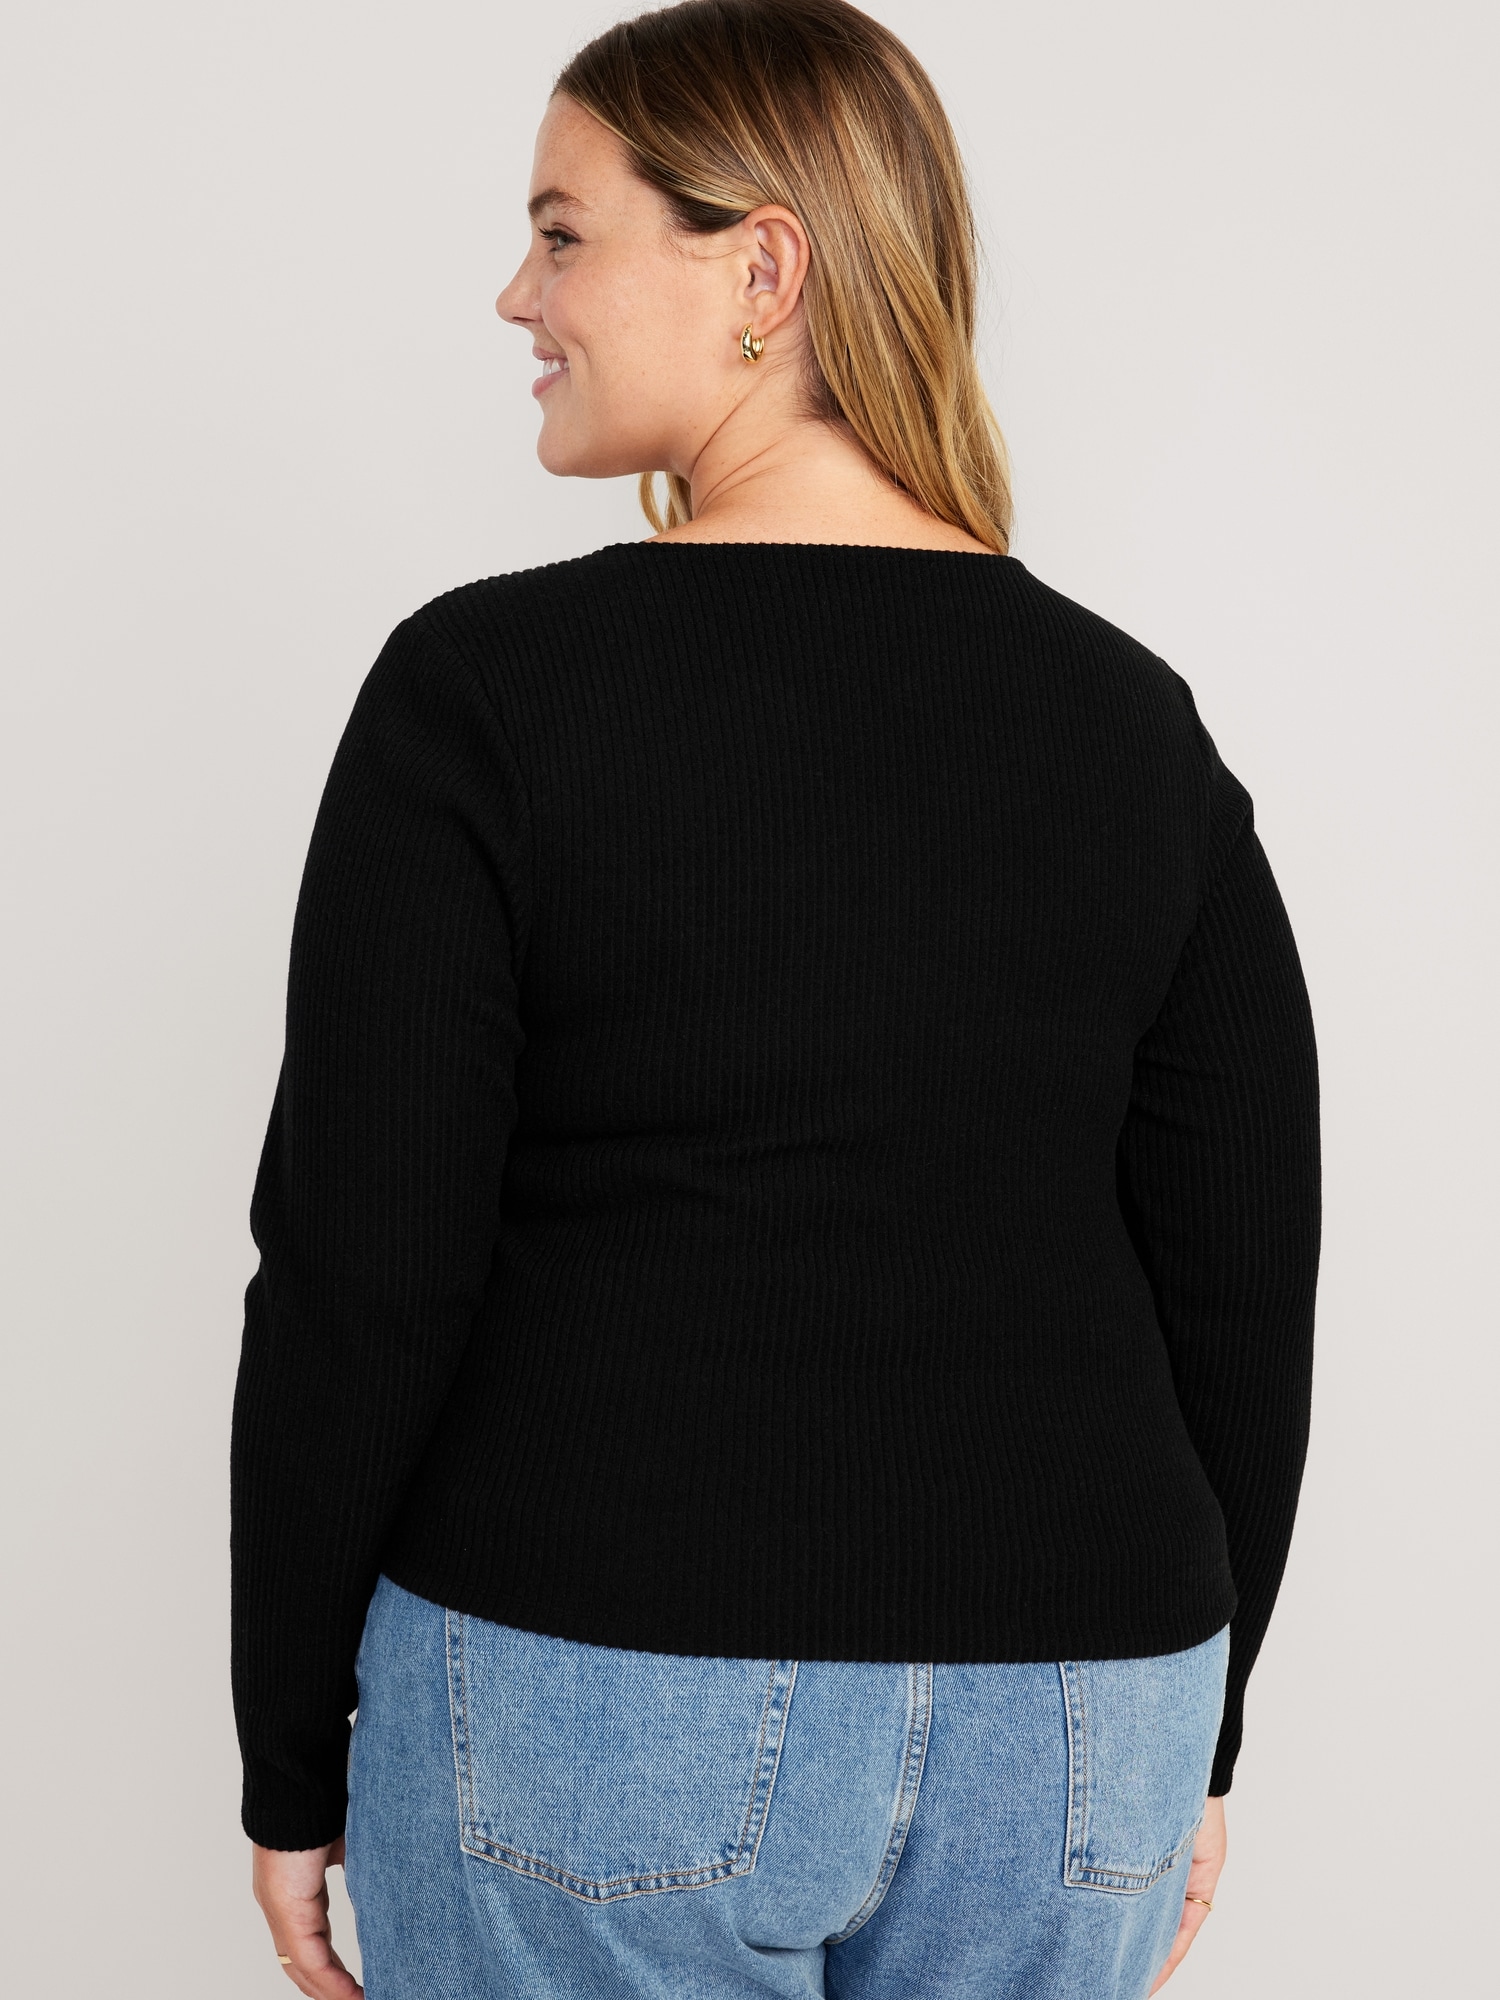 Fitted Long-Sleeve Strappy Top Women for Navy | Old Keyhole